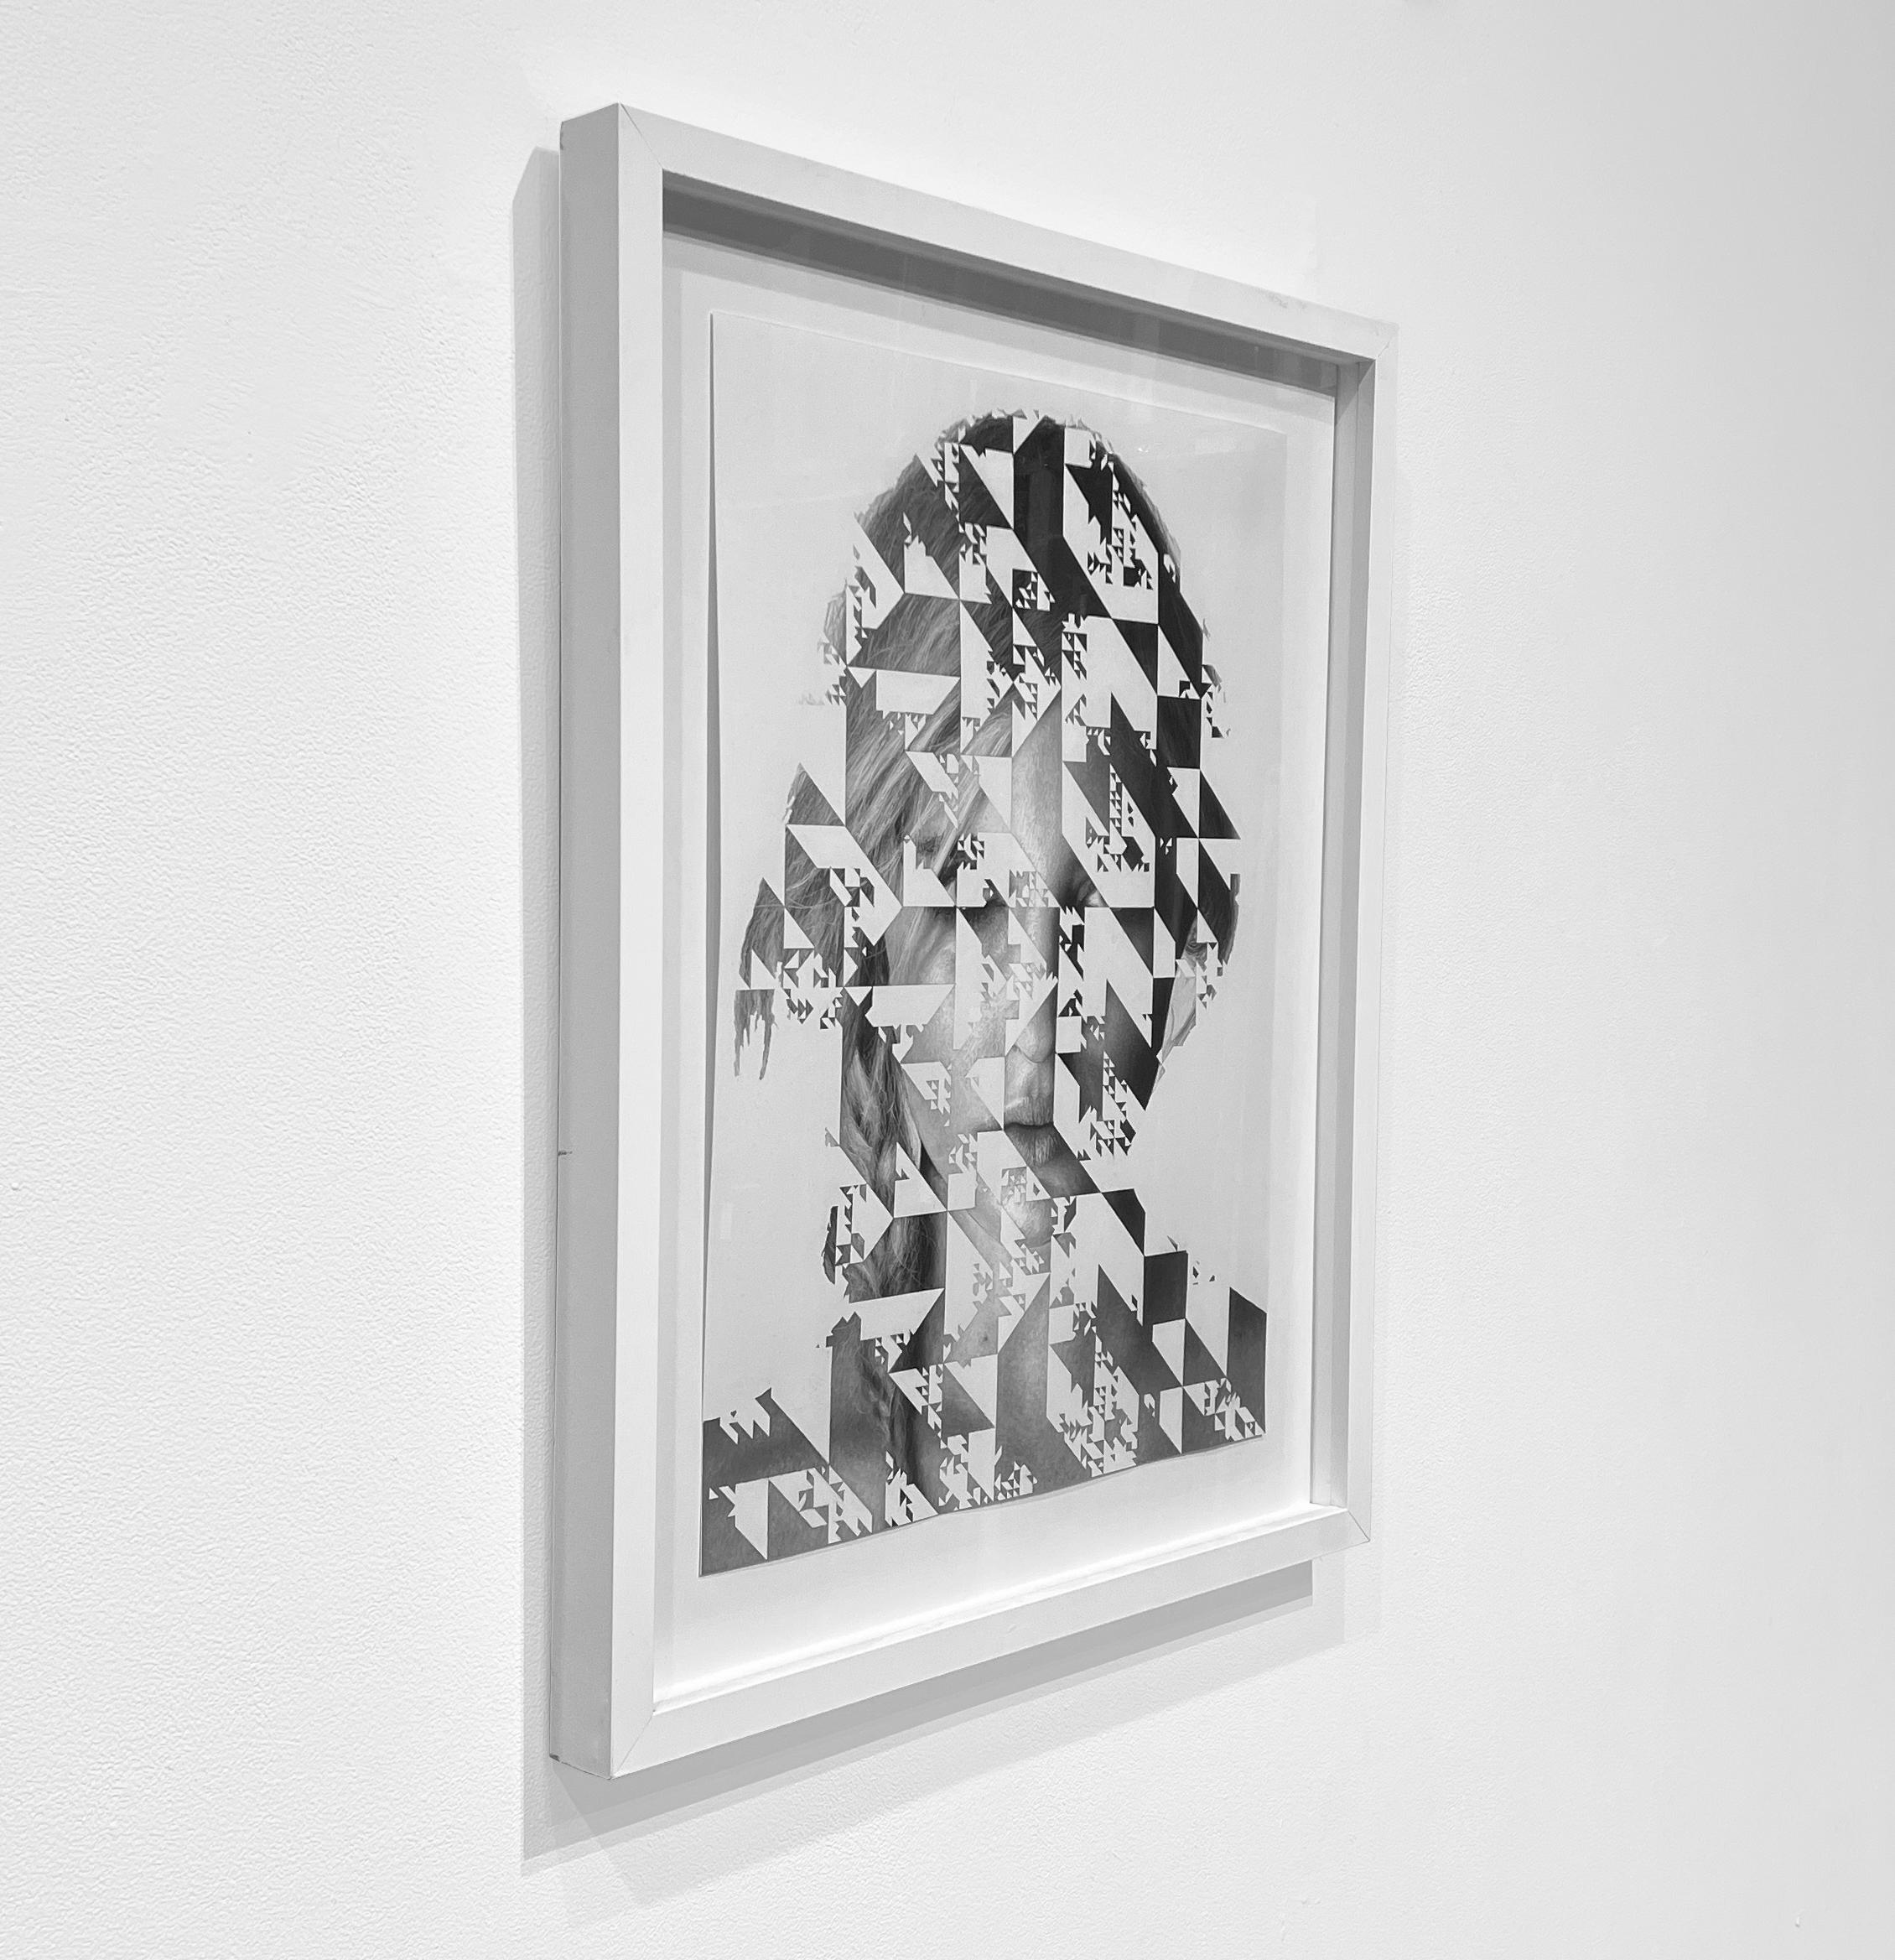 UNTITLED (FAB V) - portrait / overlaid designs /black and white / greyscale - Contemporary Mixed Media Art by Ryan Bradley